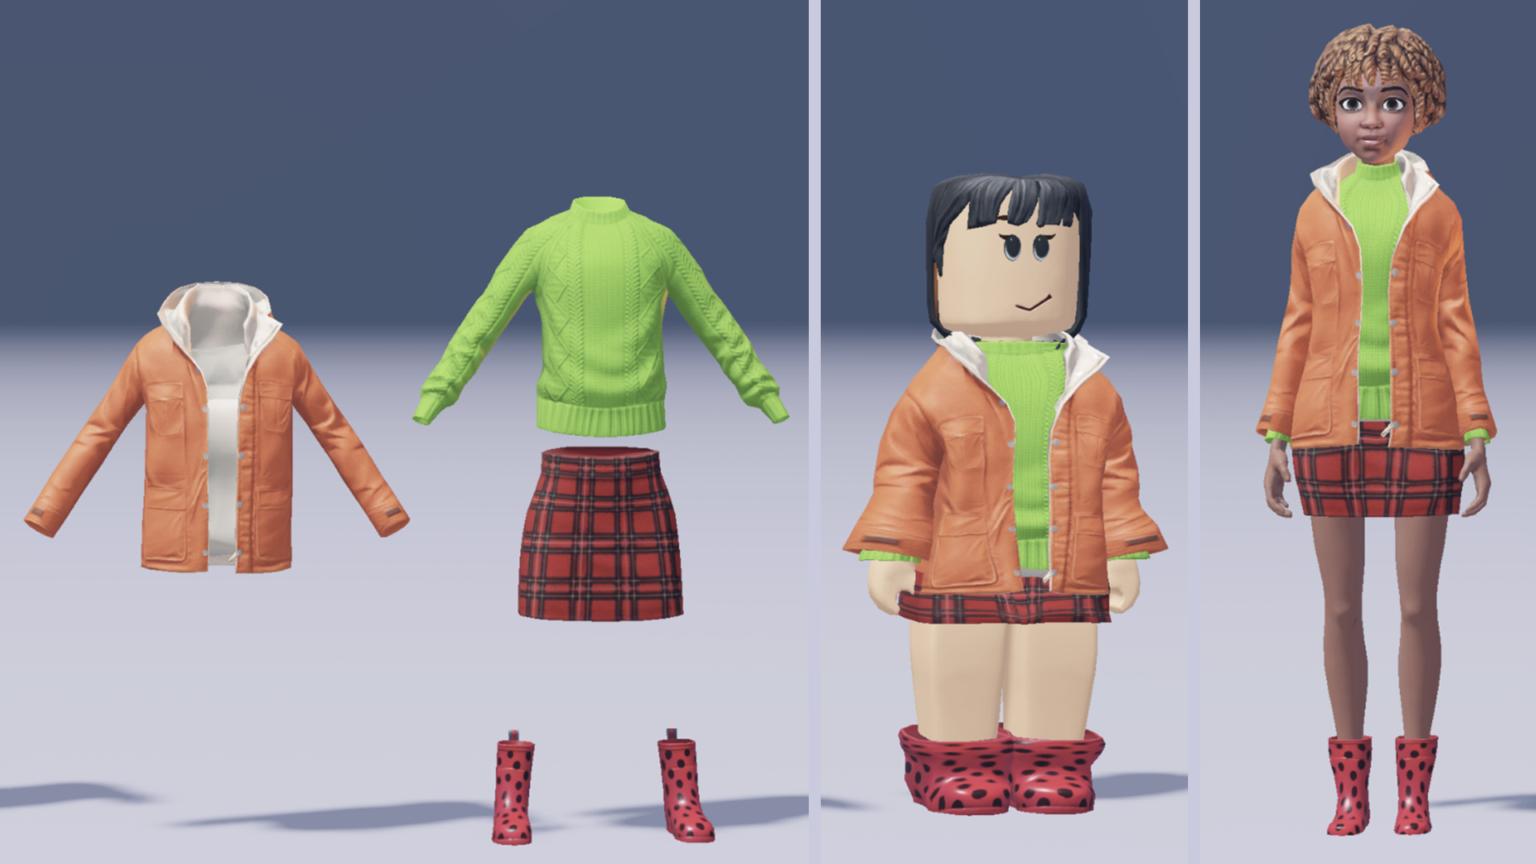 New platform technology allows you to use the same clothes on any avatars